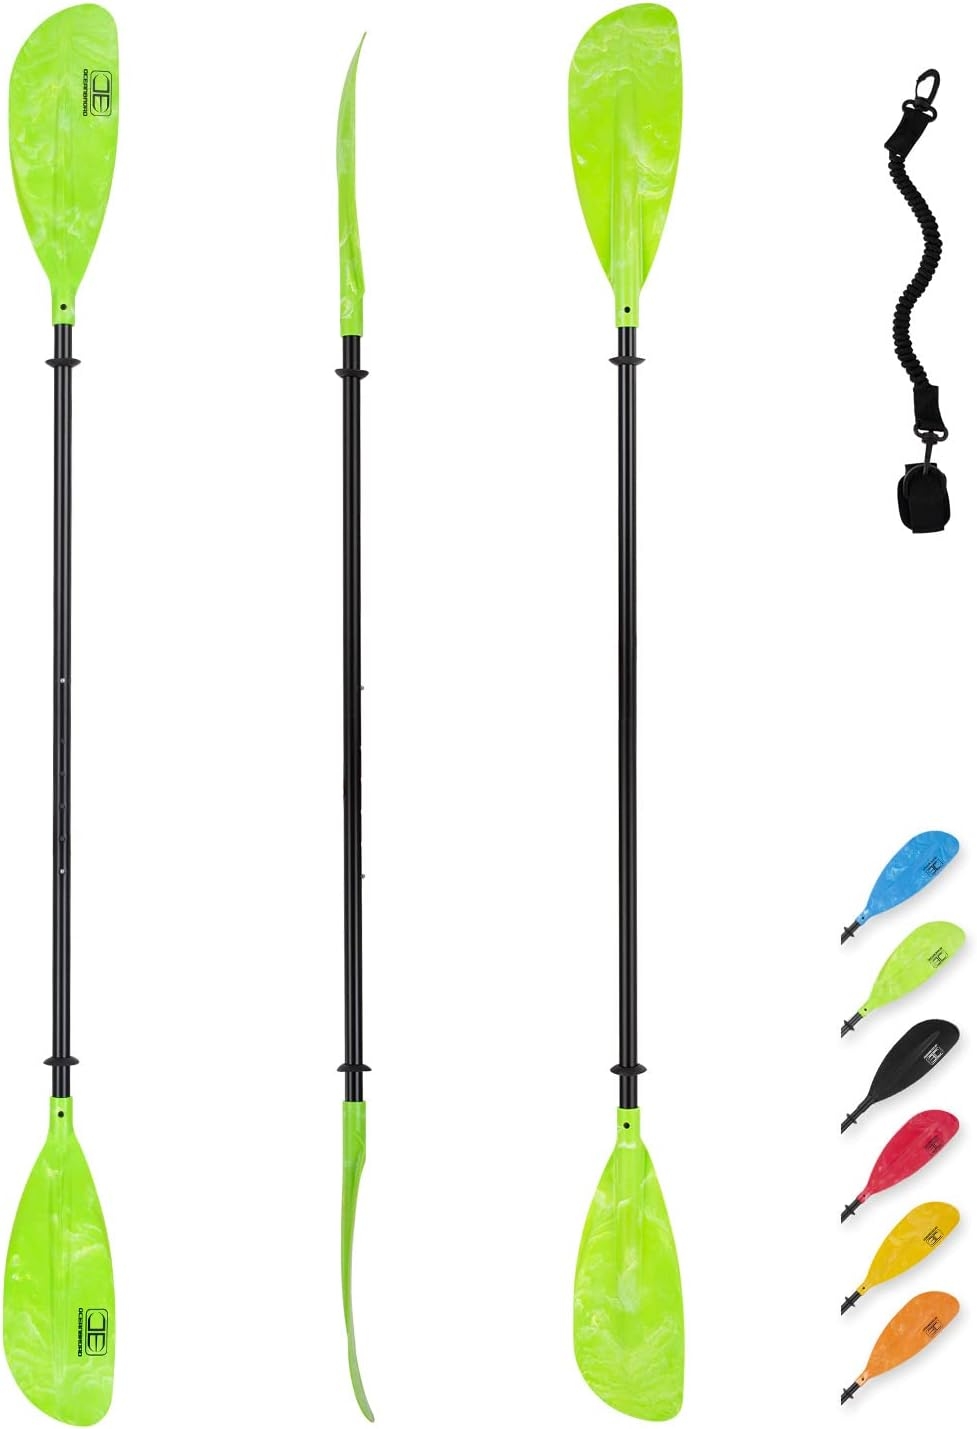 OCEANBROAD Adjustable Kayak Paddle 86in/220cm to 94in/240cm Kayaking Boating Canoeing Oar with Paddle Leash 1 Paddle   price